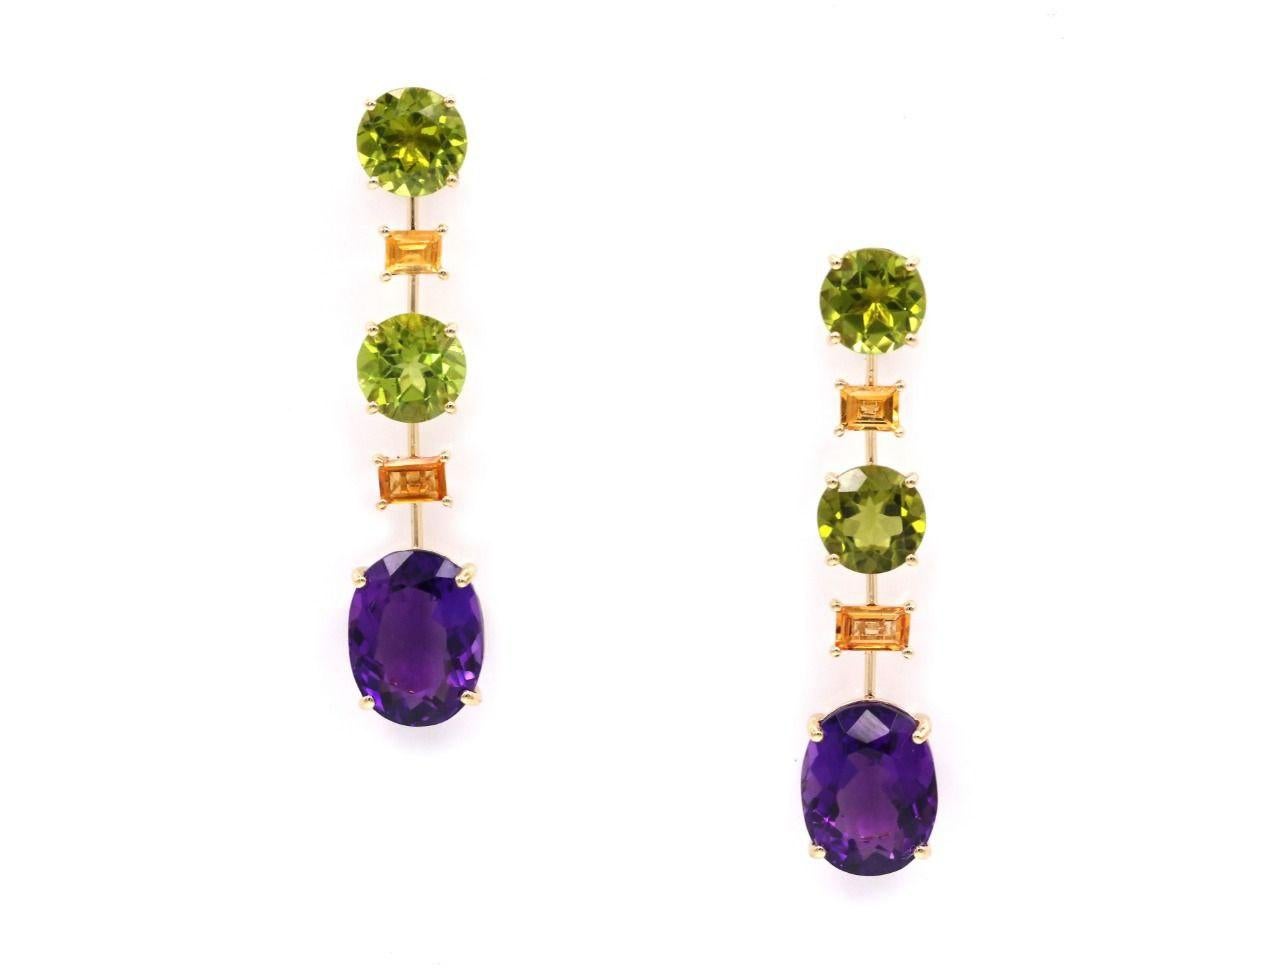 Extremely stylish fashionable 30.38 Carat Amethyst Peridot Sapphire 18 Karat Yellow Gold Drop Earrings

Beautiful combination of vivid purple amethysts,  orange sapphires and green peridot, important size of the stones, conjunction of oval, round